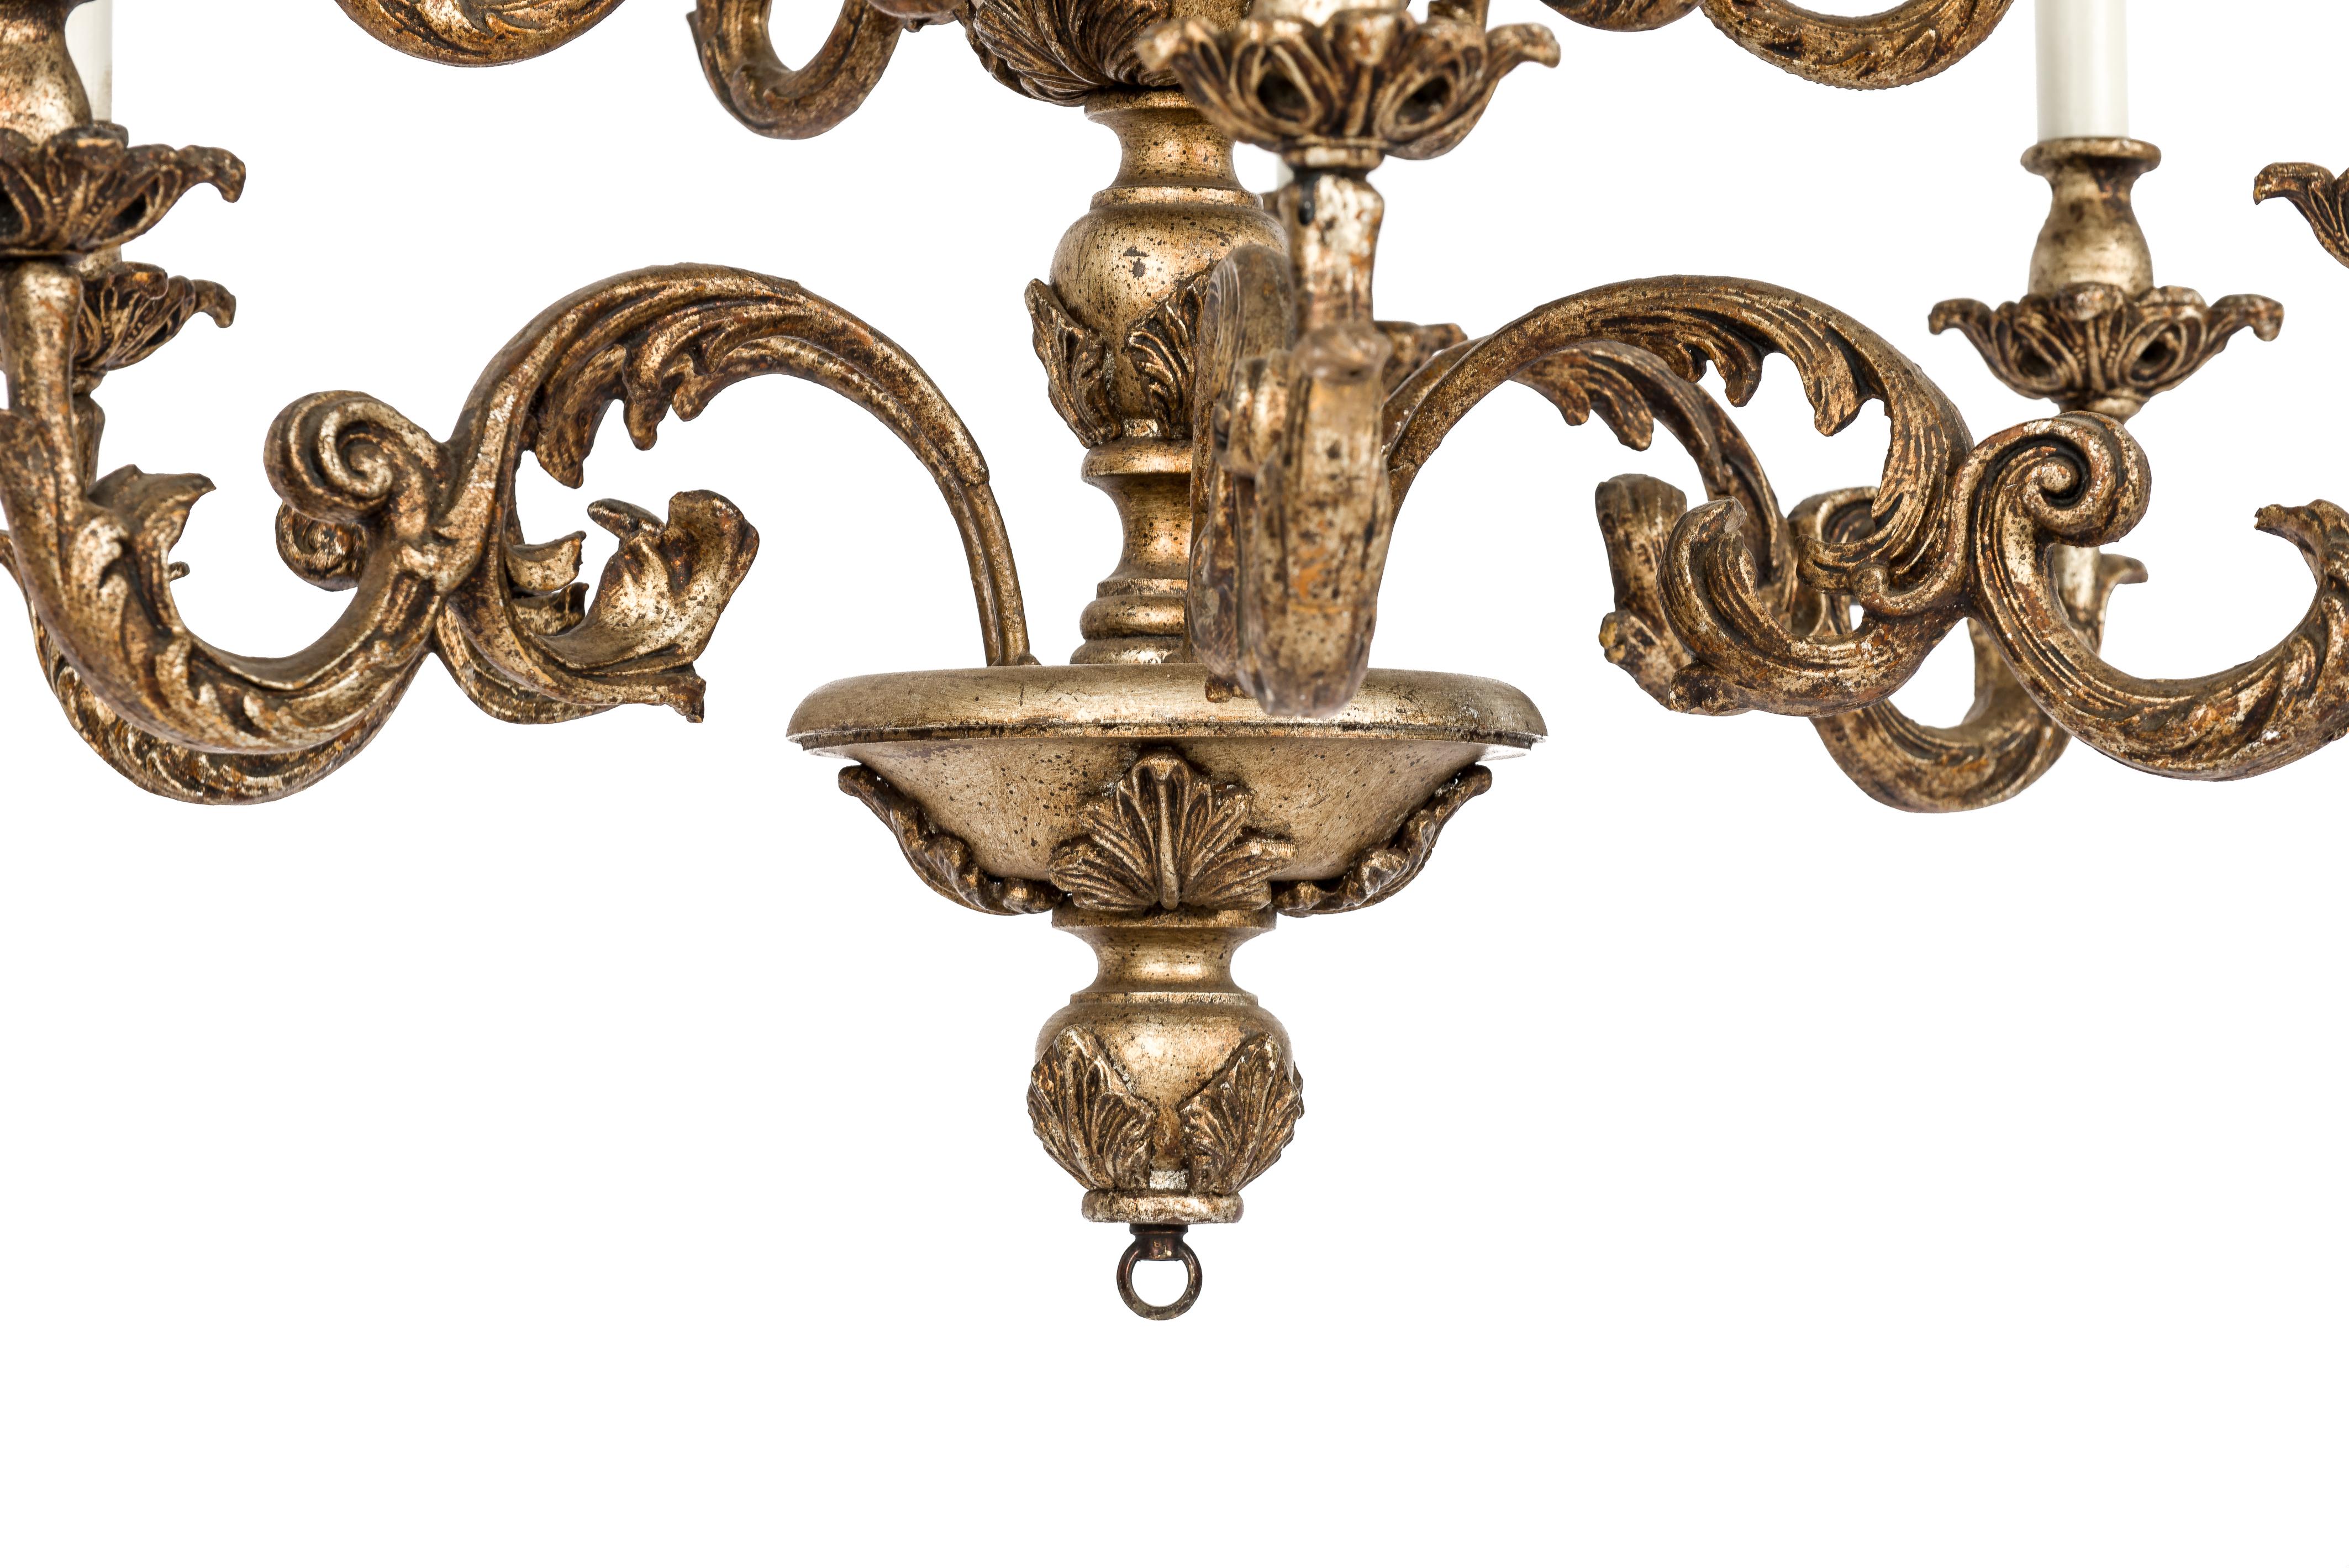 This beautiful elegant chandelier was made in Florence Italy in the early 20th century circa 1910. It features a central turned wooden column decorated with cast acanthus leaves. The chandelier has two tiers with each 6 scrolled arms ending in